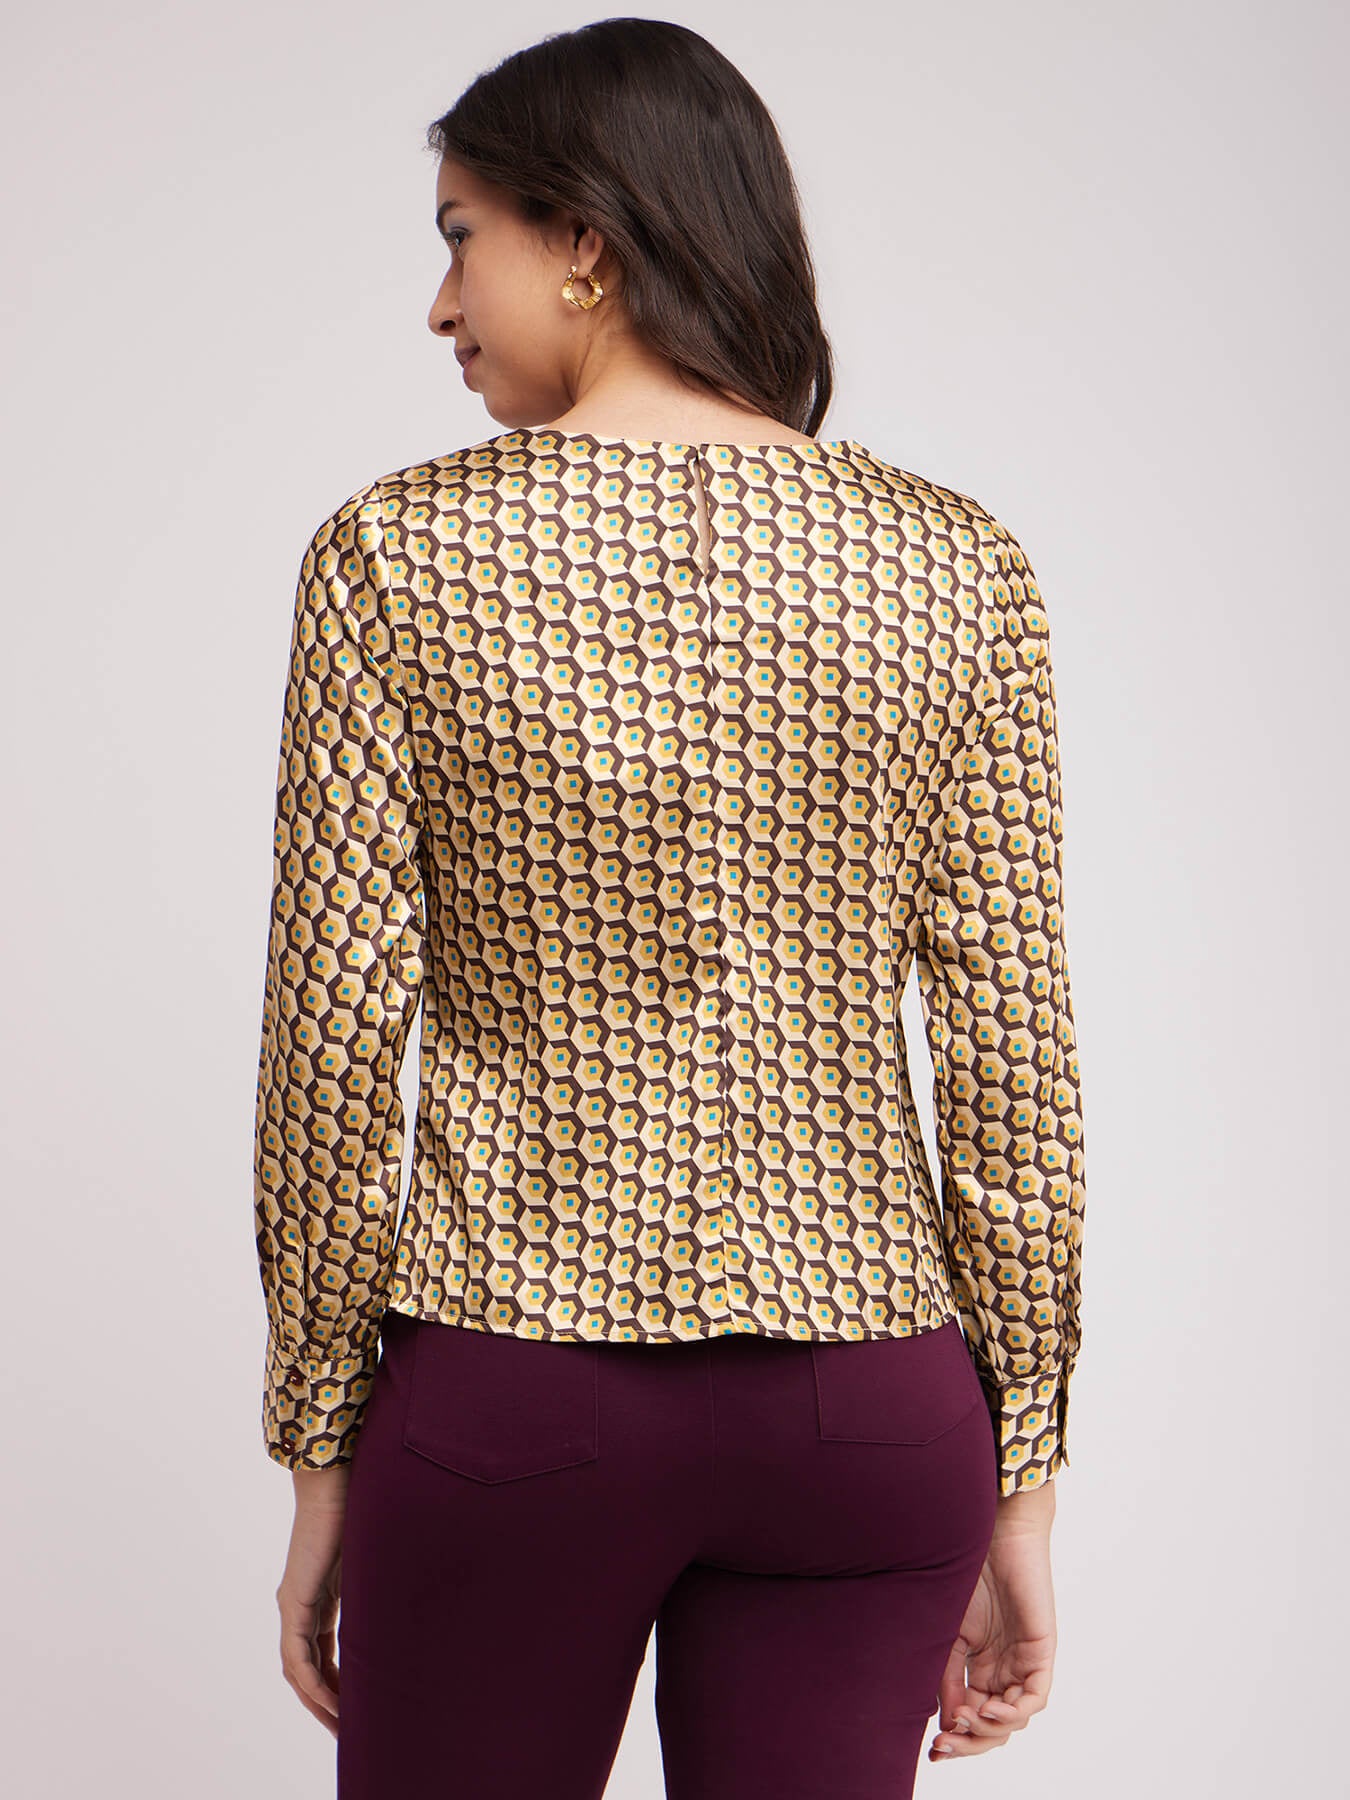 Geometric Round Neck Top - Brown And Beige